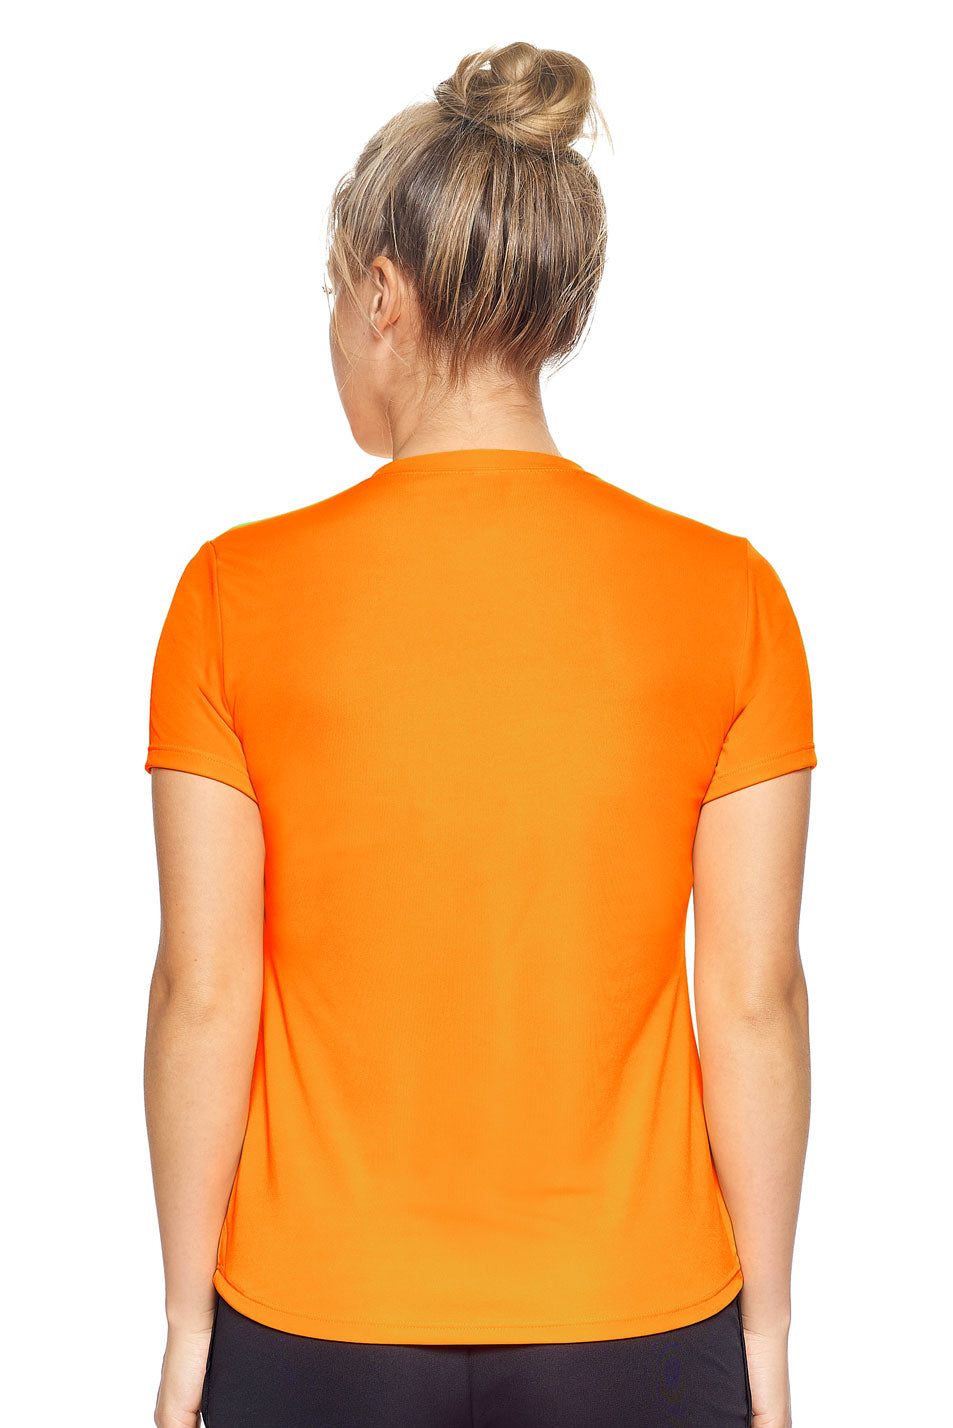 Expert Brand Wholesale Best Blanks Made in USA Activewear Performance Women's DriMaX™ Short Sleeve Expert Tee T-Shirt image 3#safety-orange